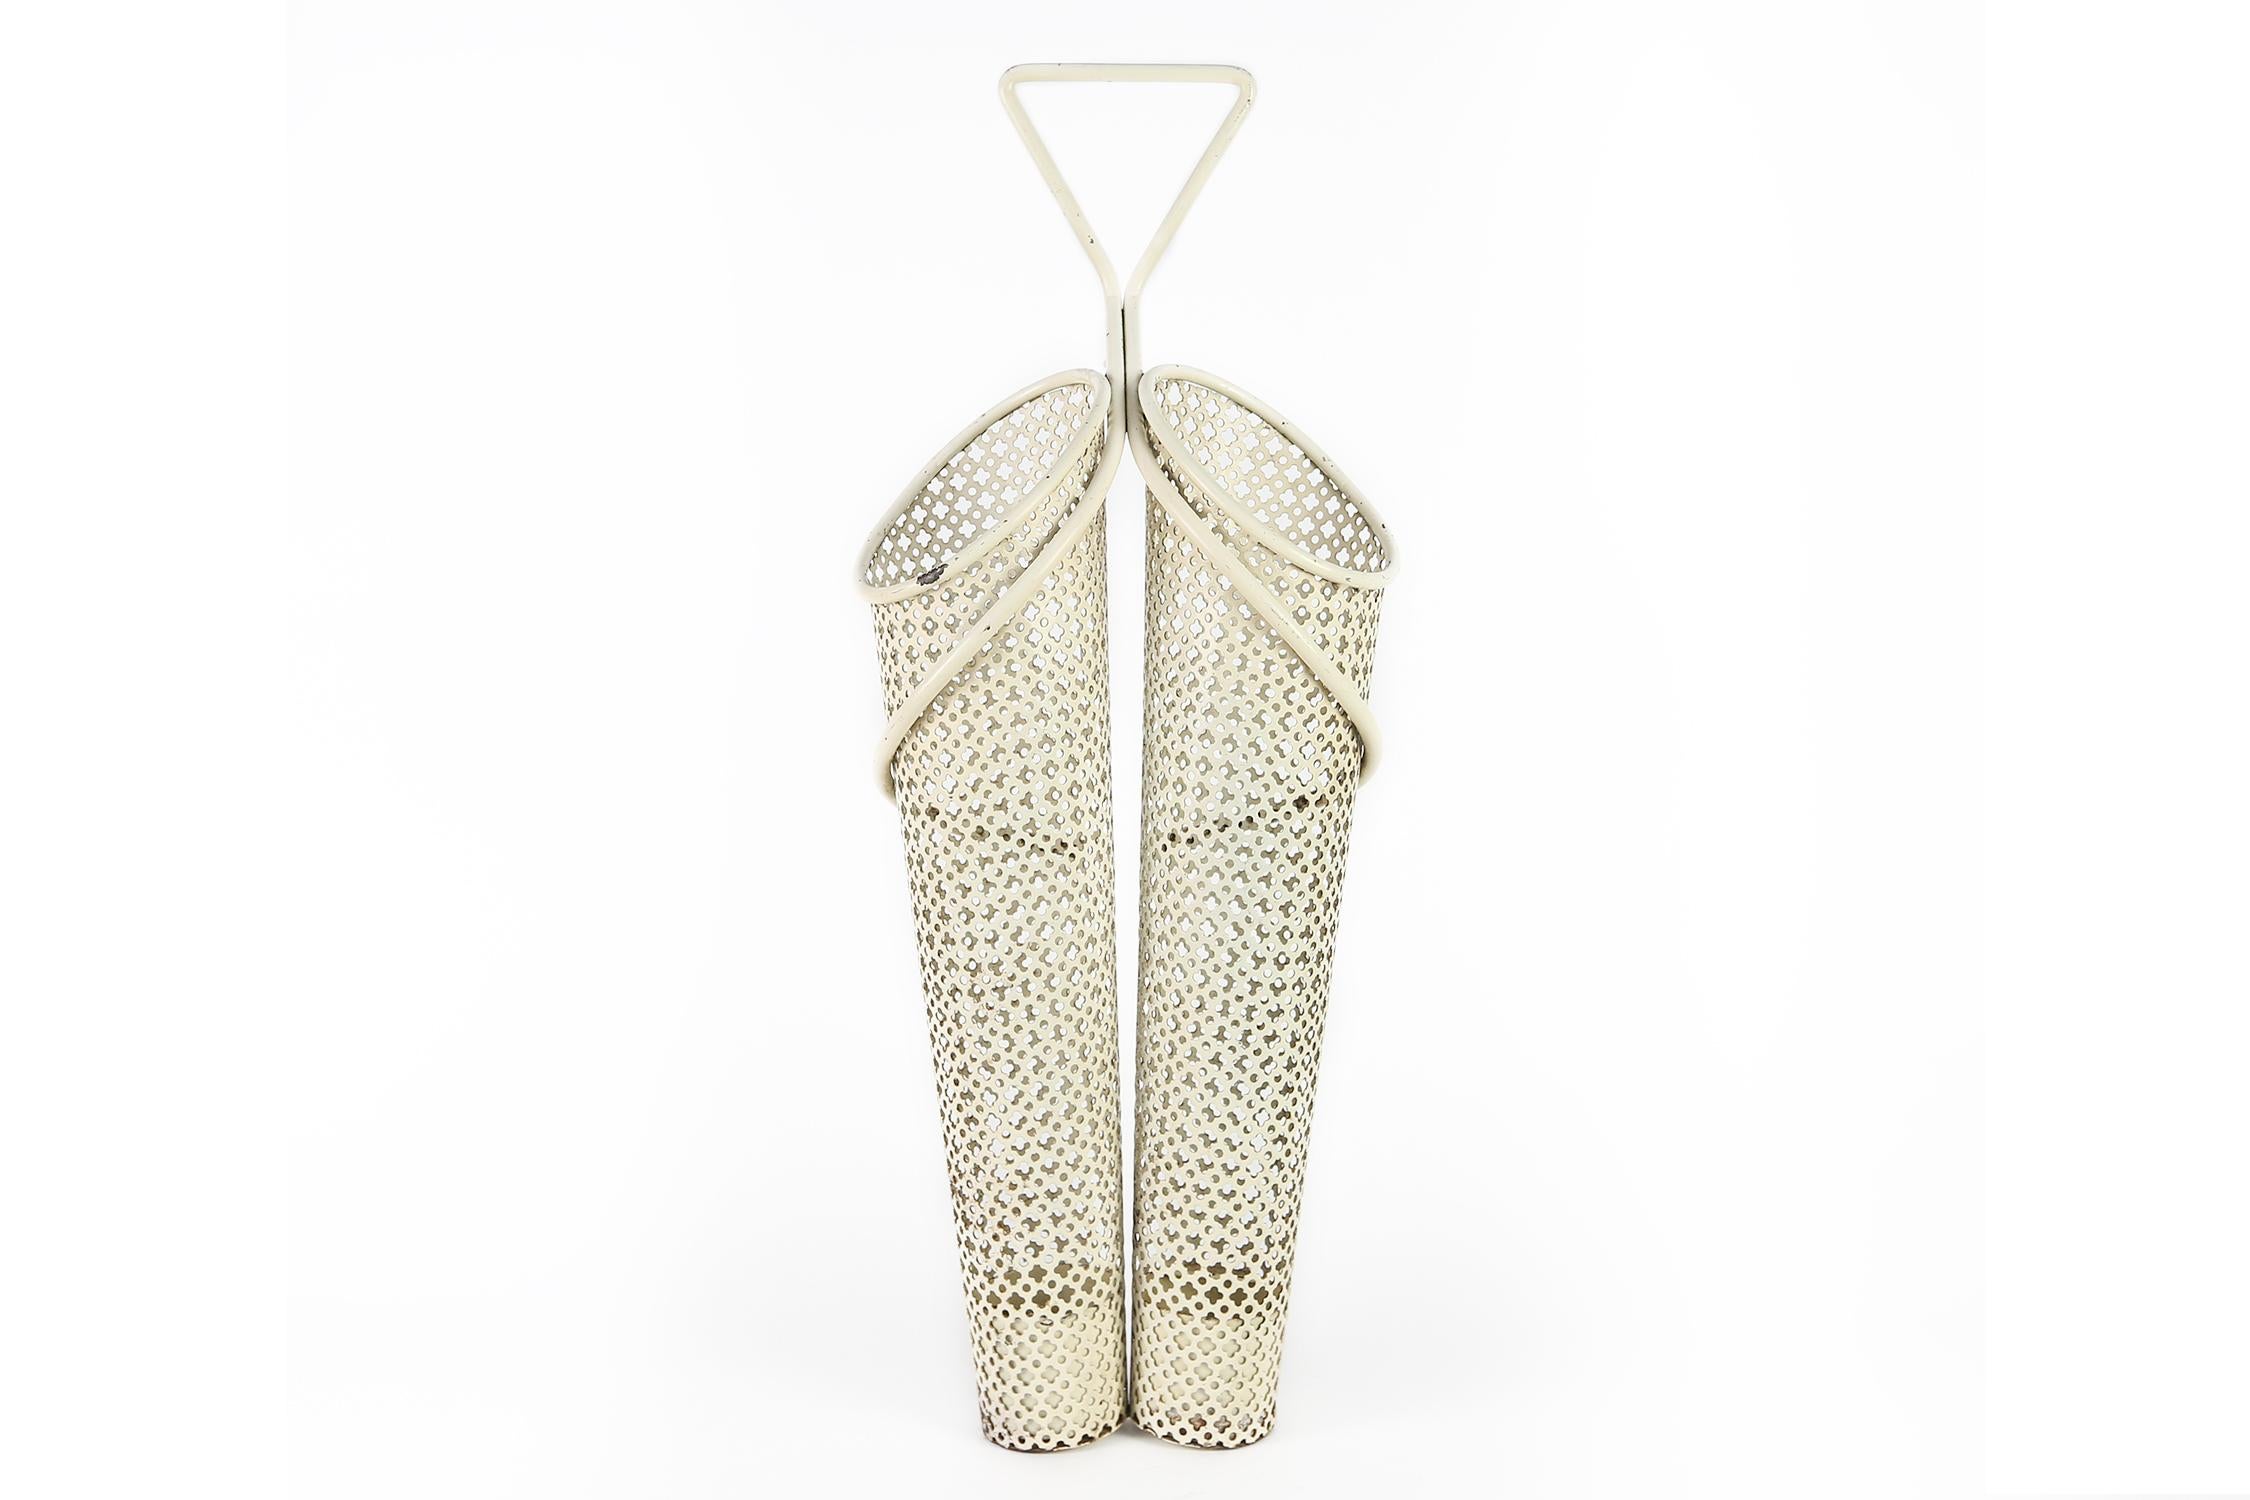 Umbrella holder by French designer Mategot in enameld en perforated steel, designed in the 1950s
In good condition with its original paint.